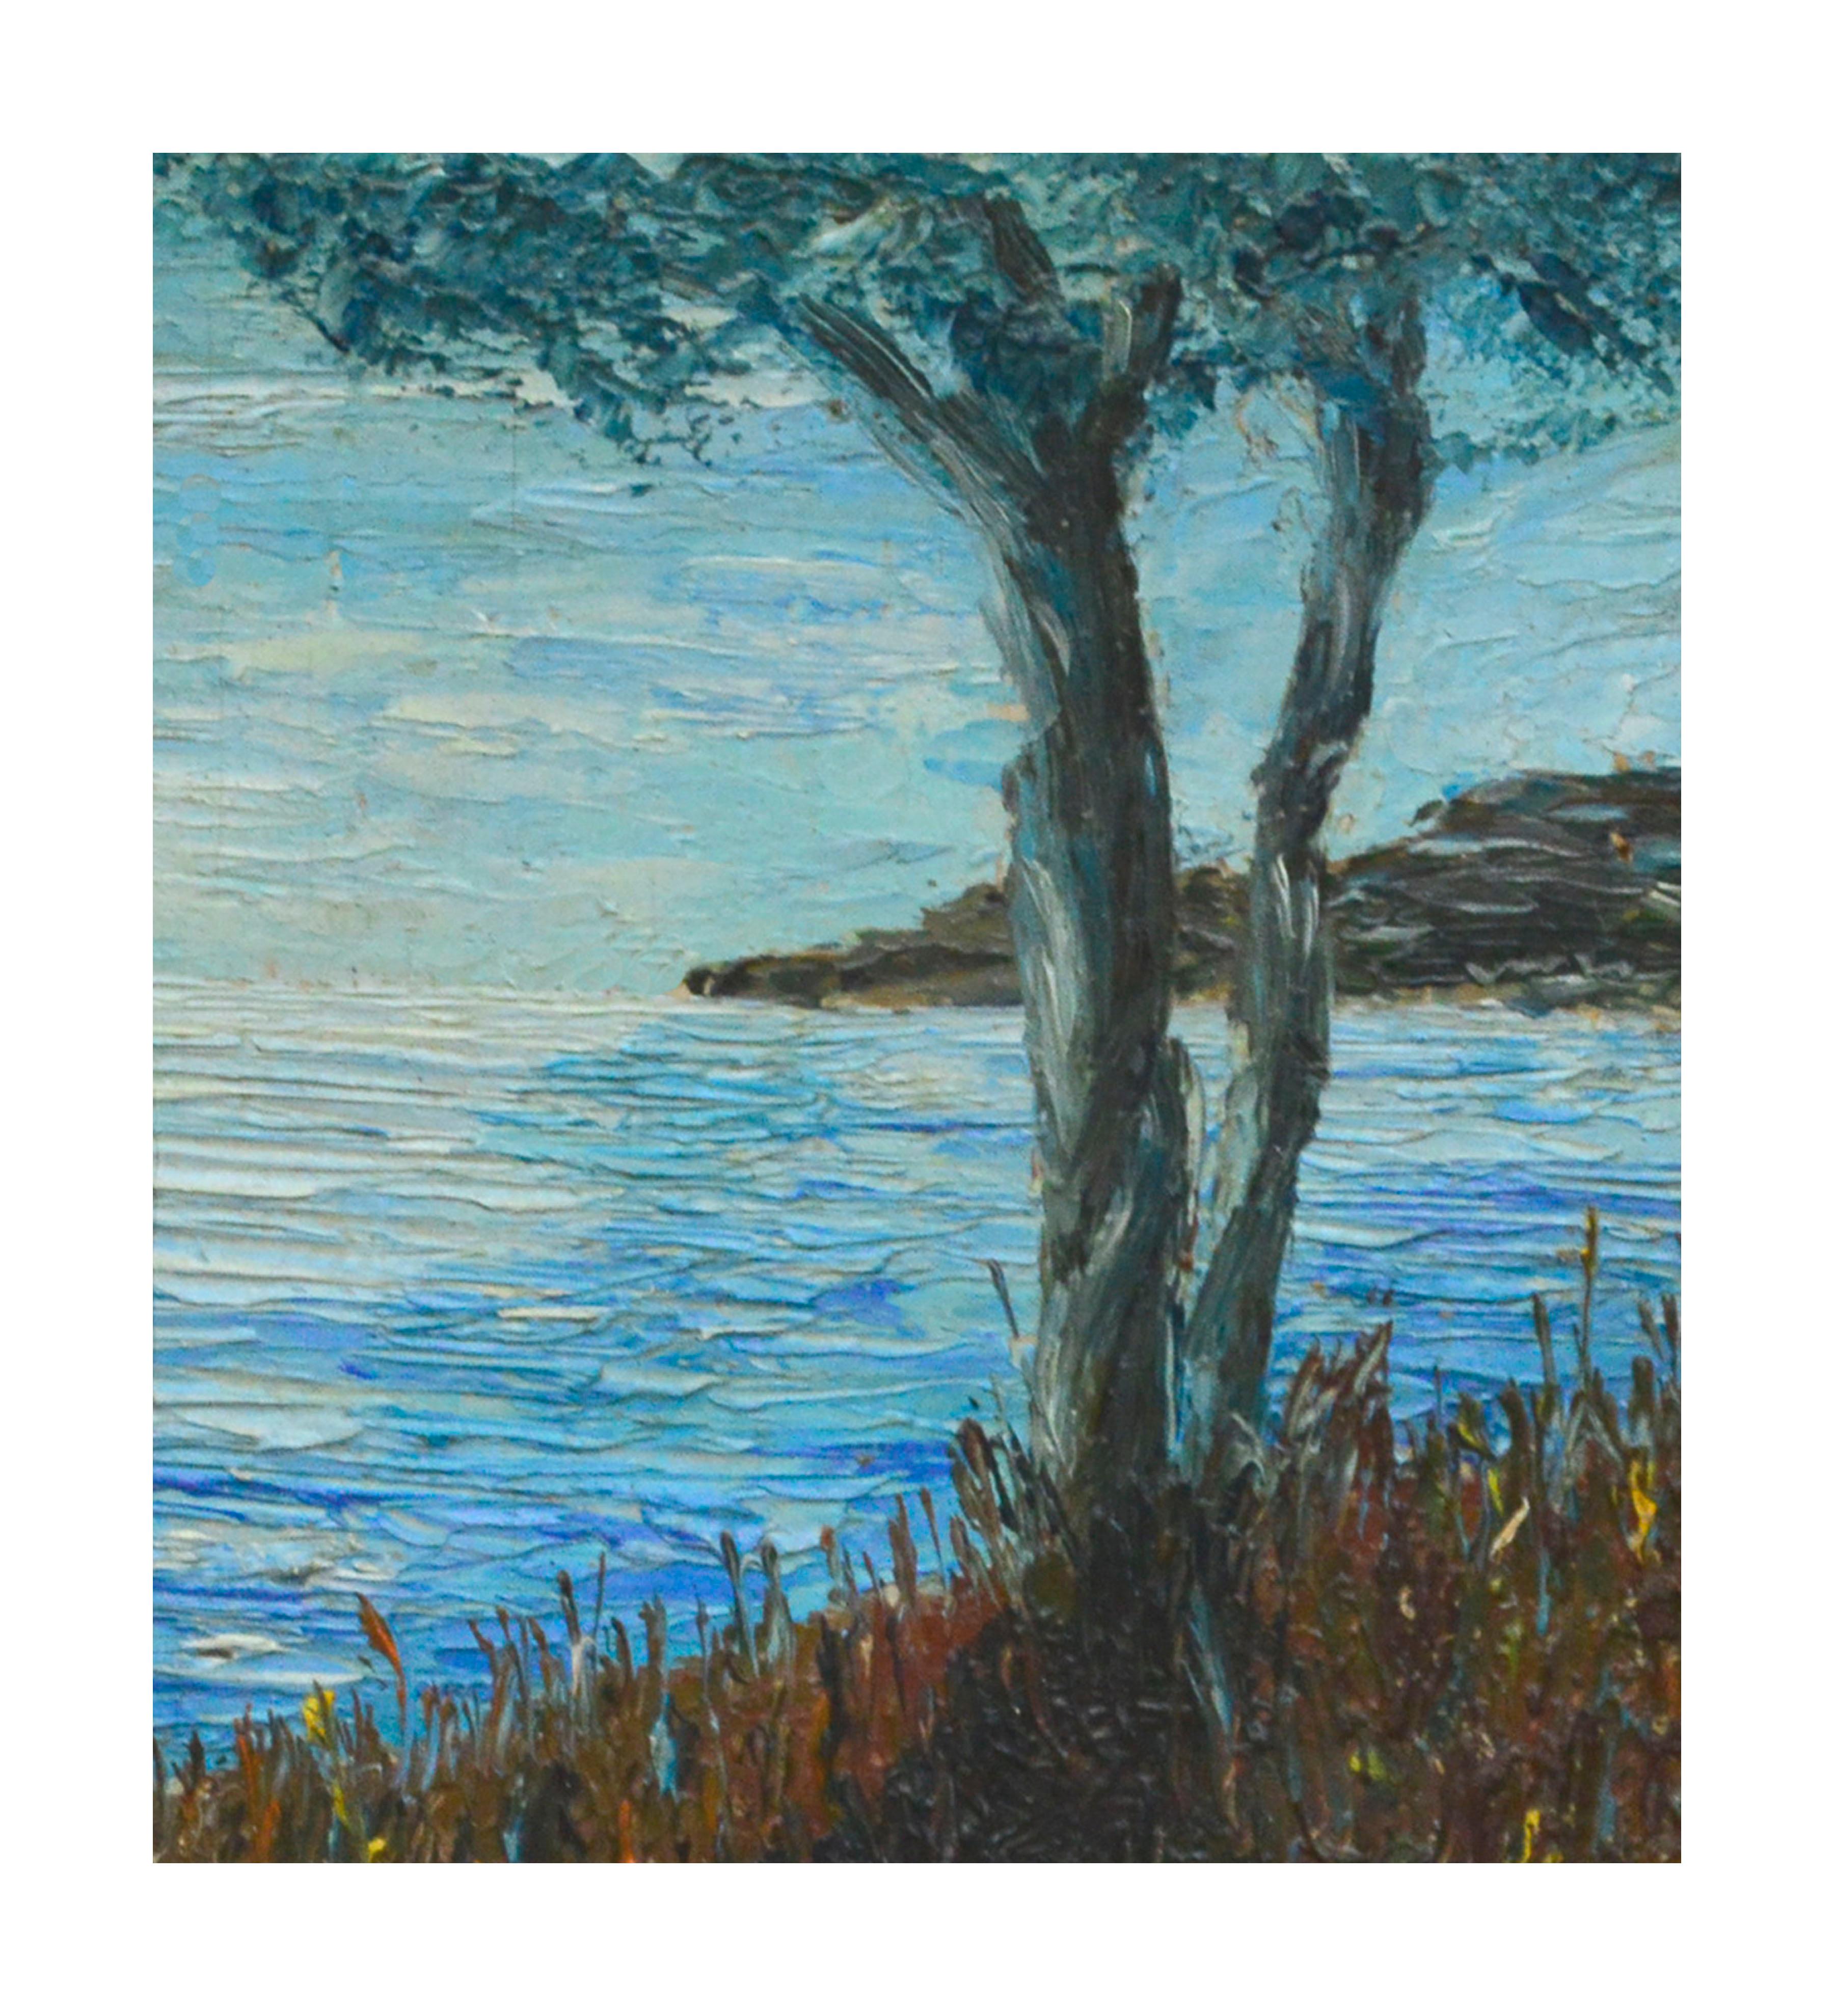 Tree by the Bay, Small-Scale Mid Century Coastal Landscape  - American Impressionist Painting by Unknown